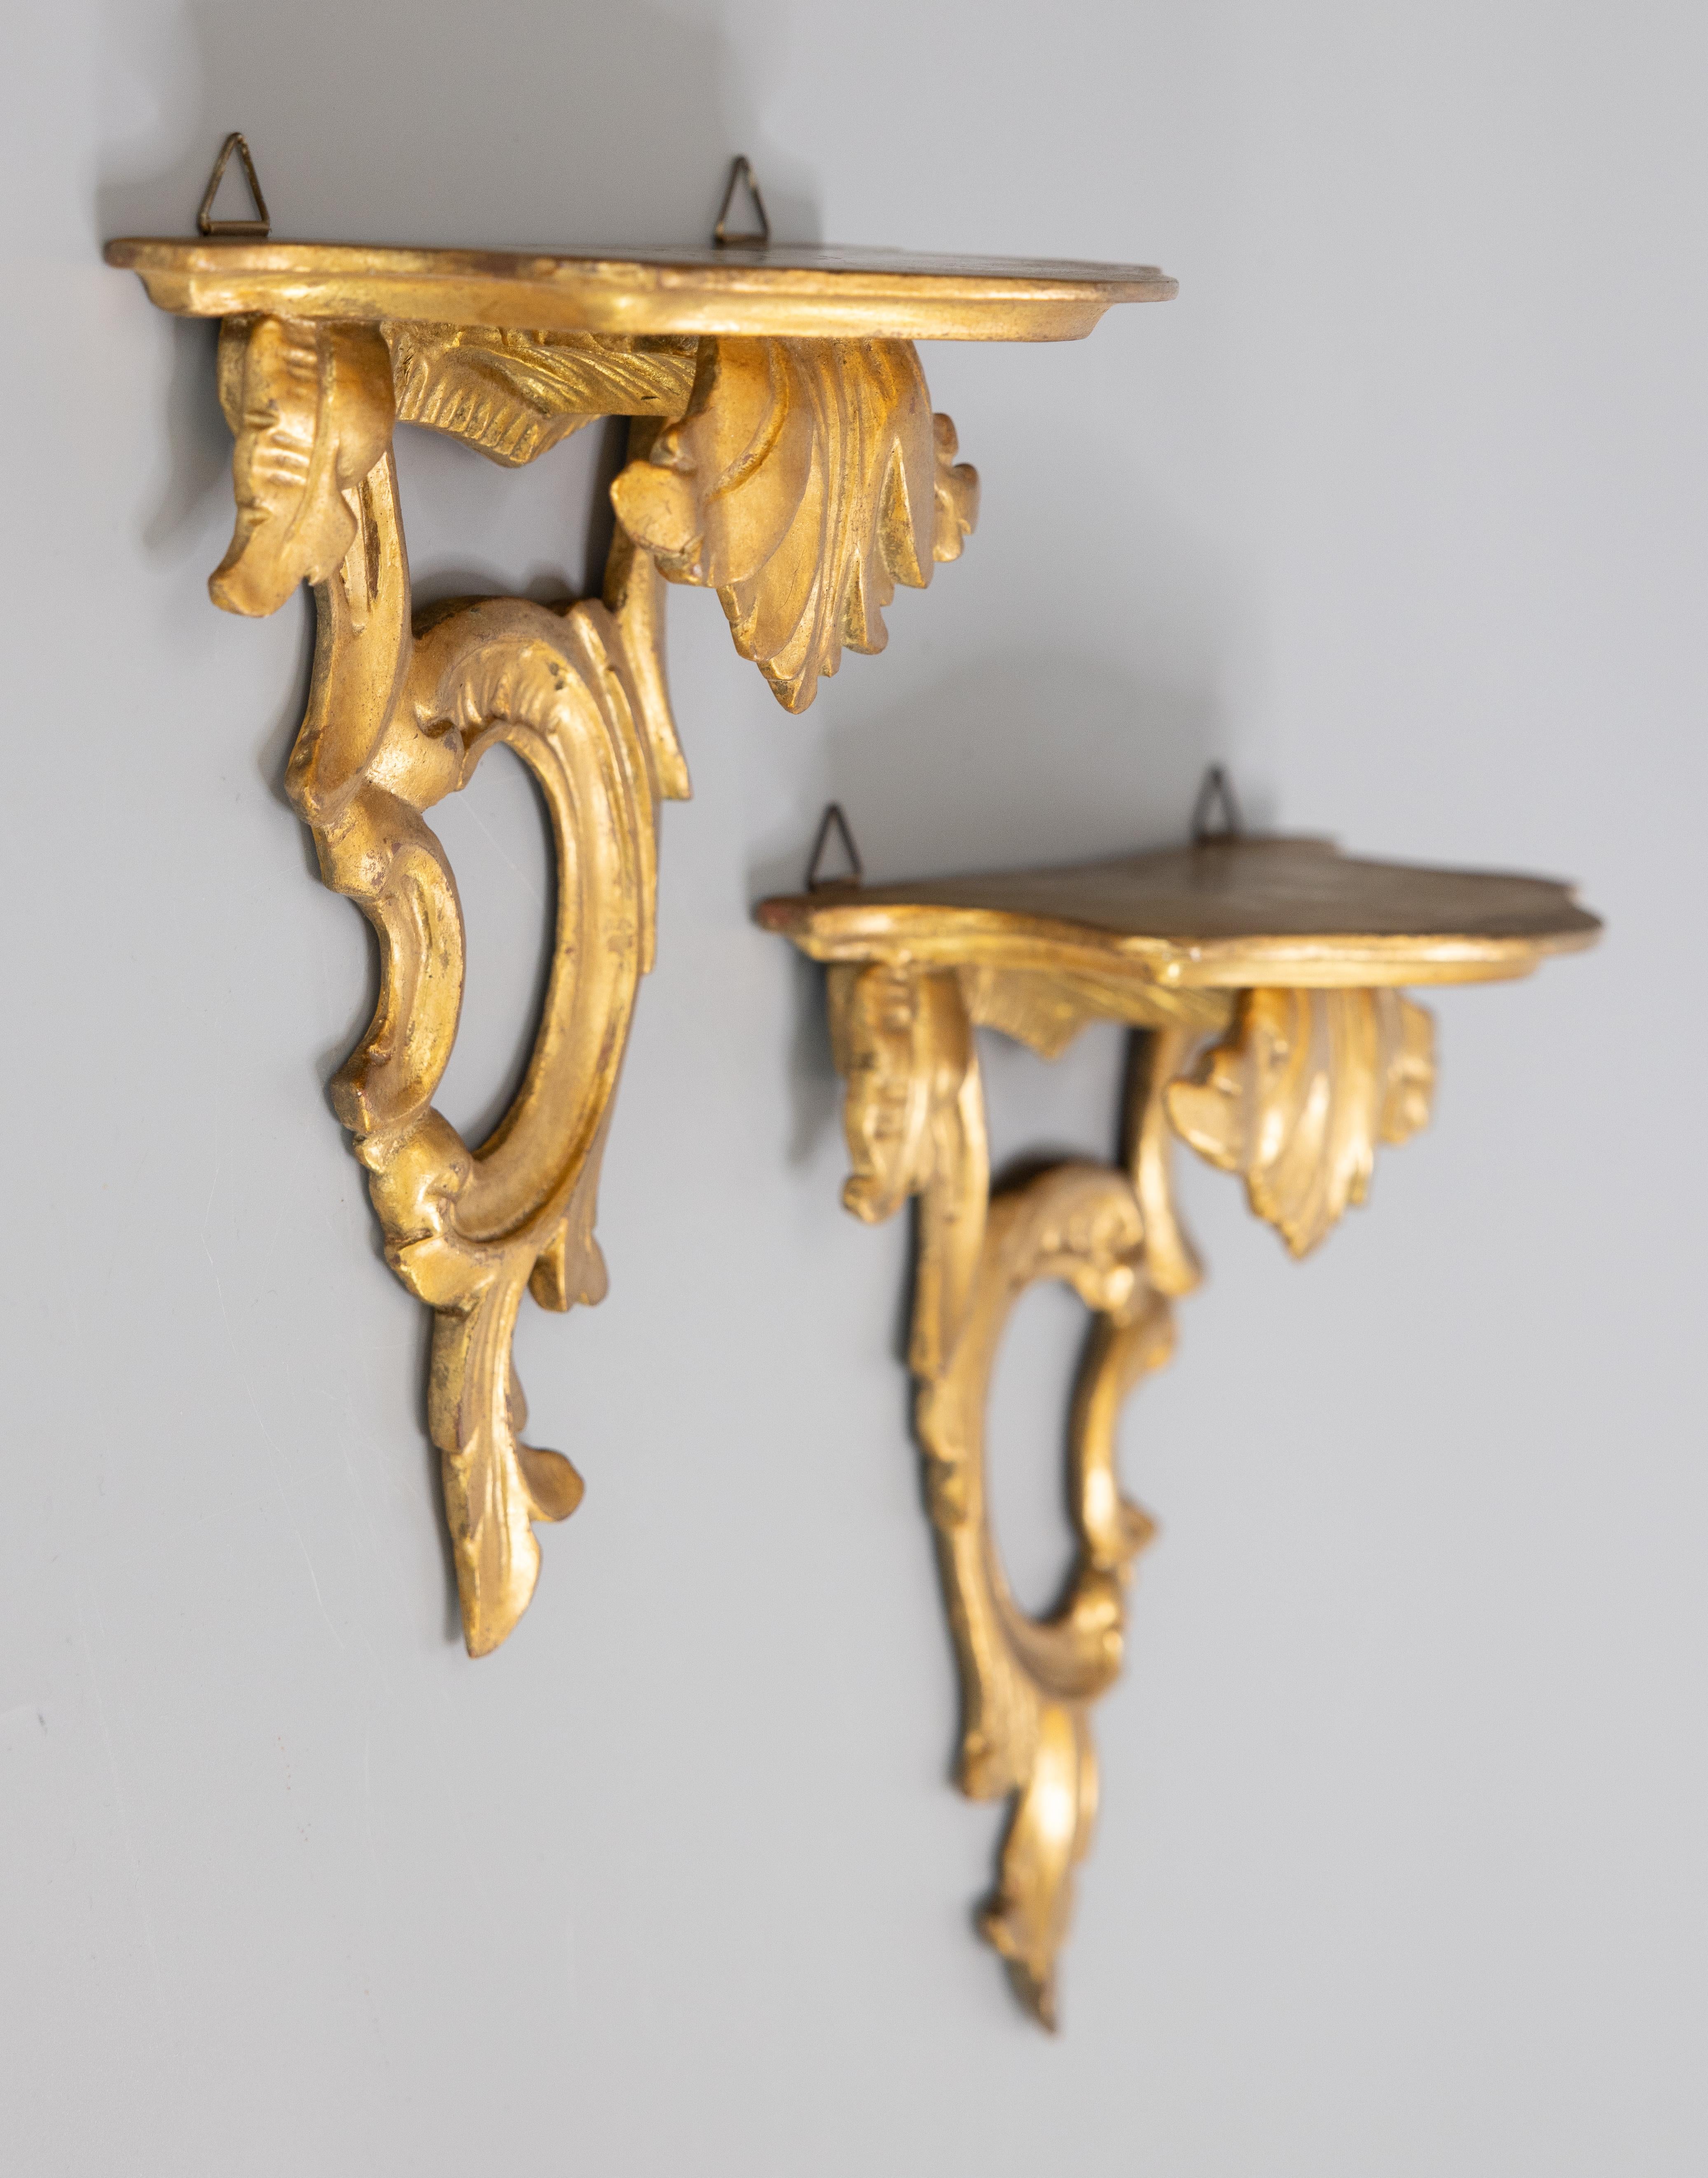 Pair of Mid-20th Century Italian Carved Giltwood Wall Brackets Shelves 2